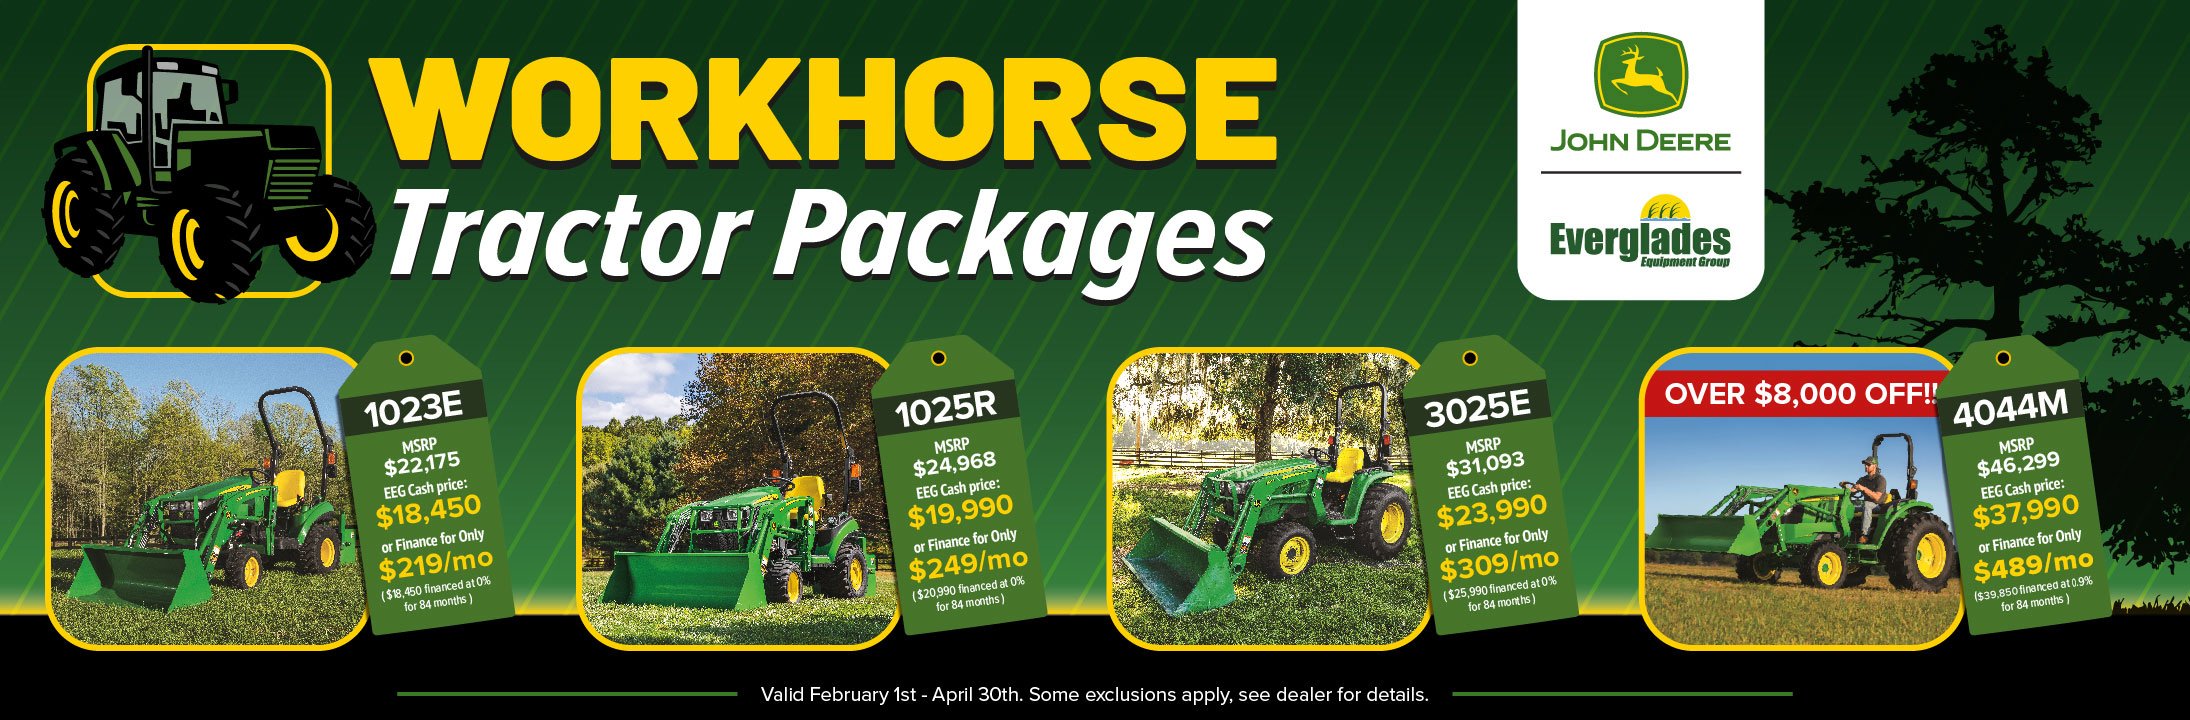 Workhorse Tractor Packages